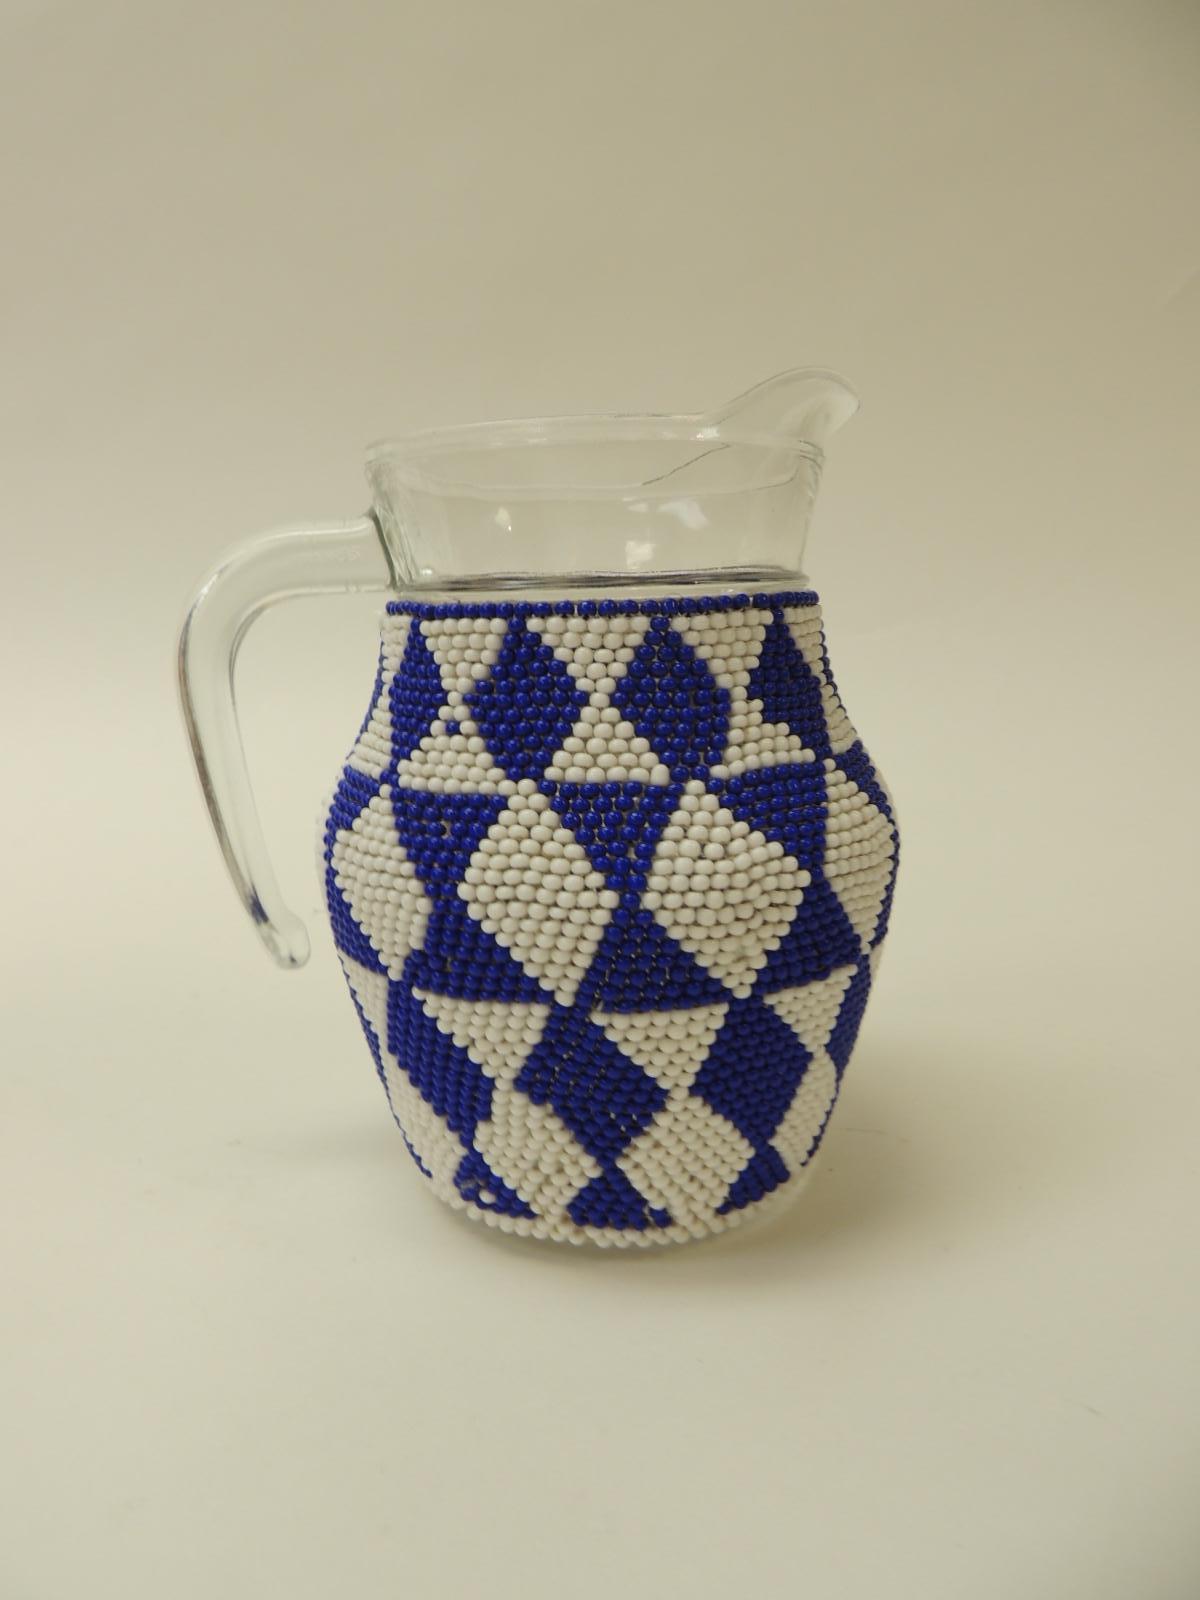 Minimalist Small Vintage Glass Milk Jug with Handcrafted Artisanal Woven Beaded Cover